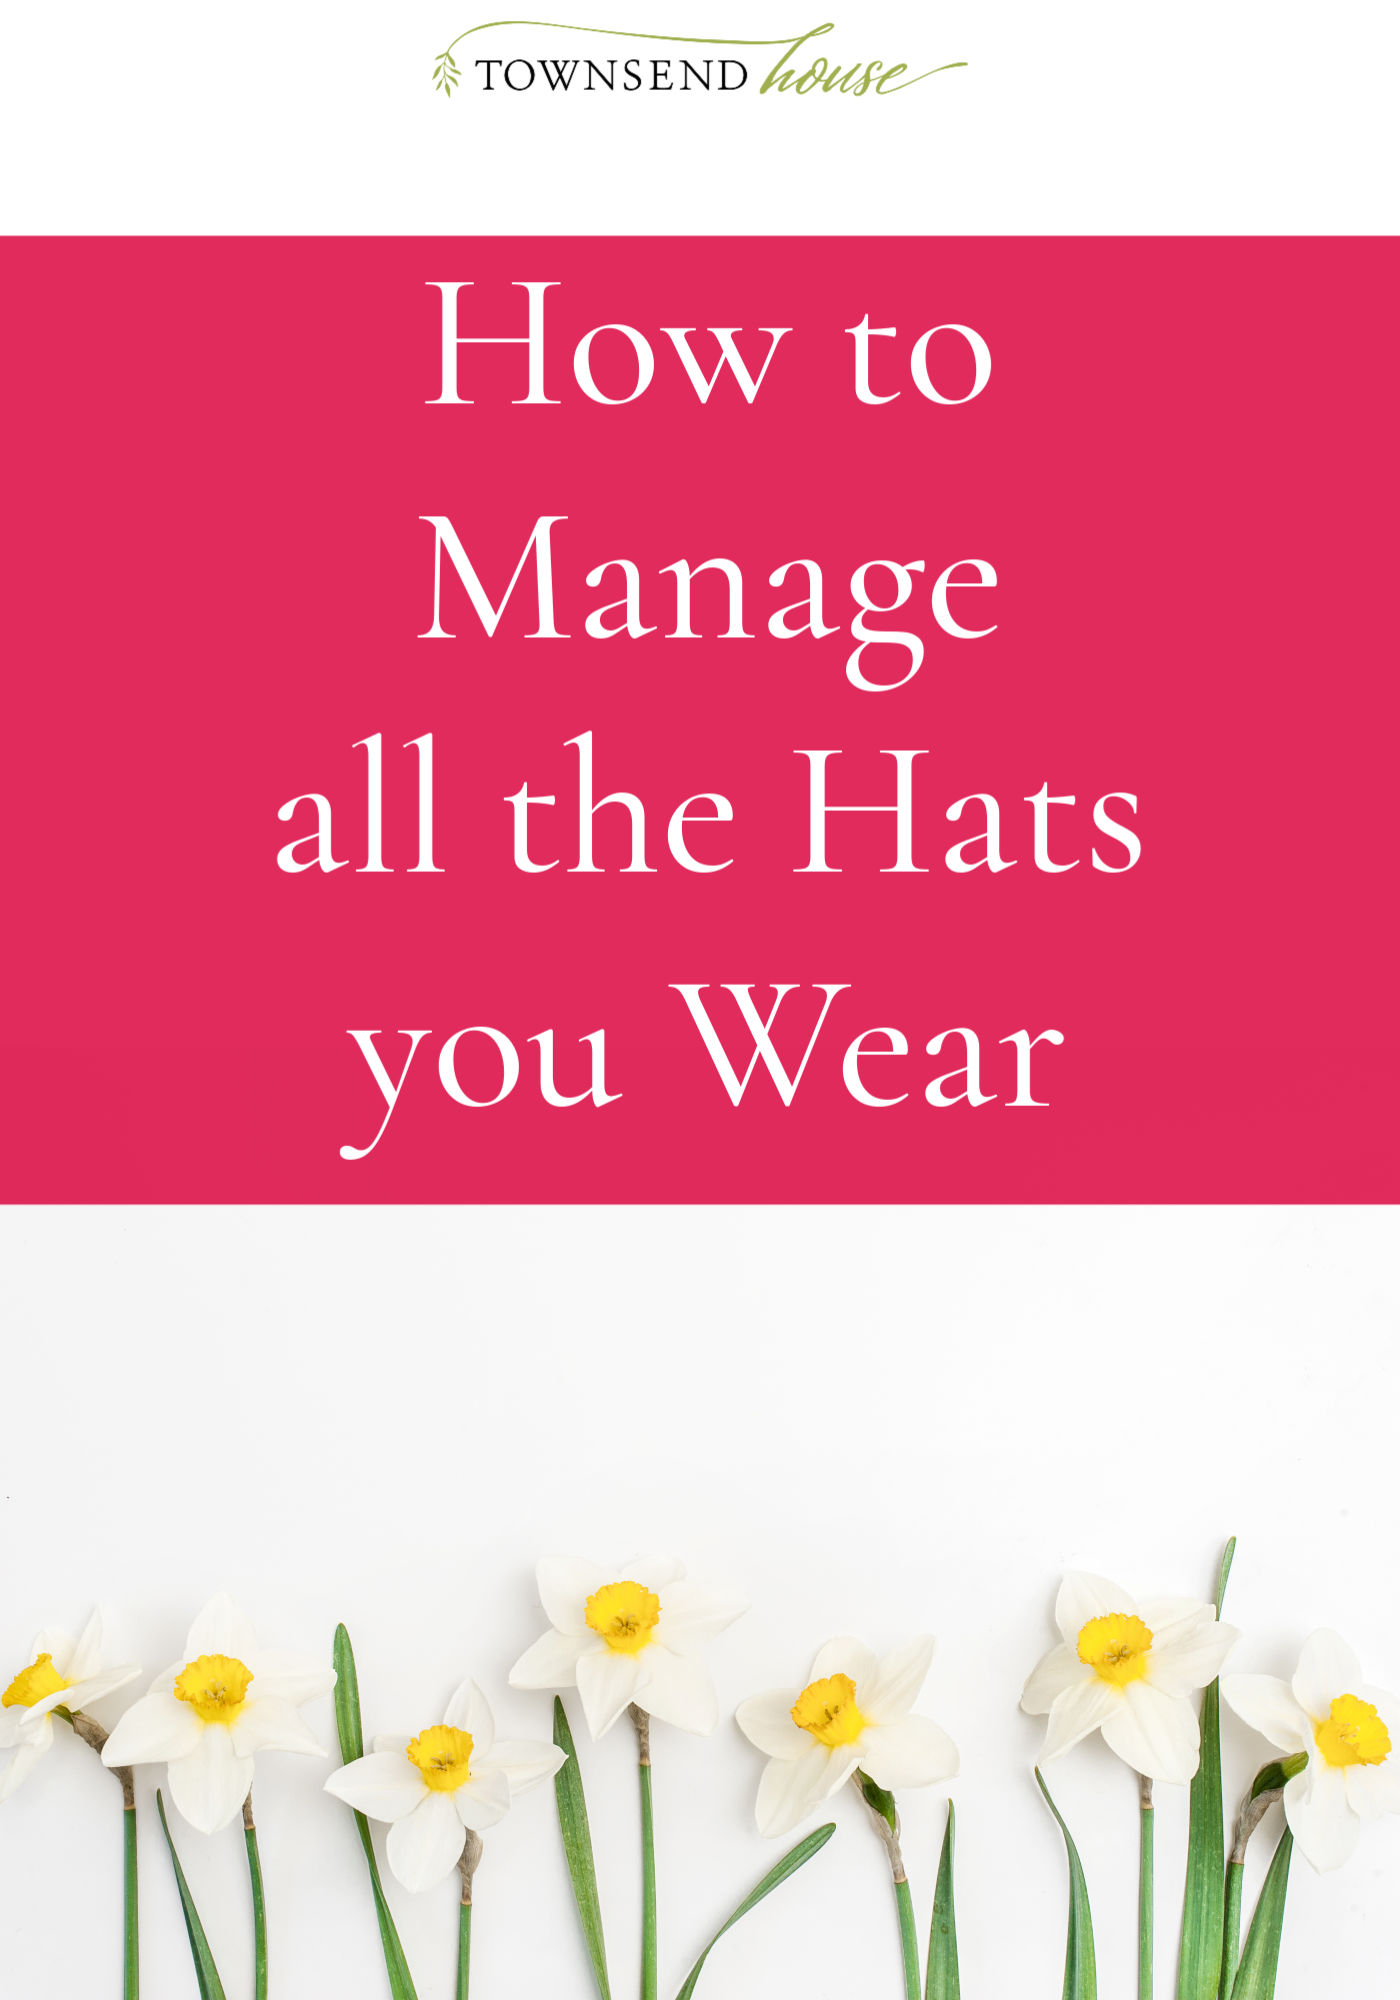 How to Manage all the Hats you Wear